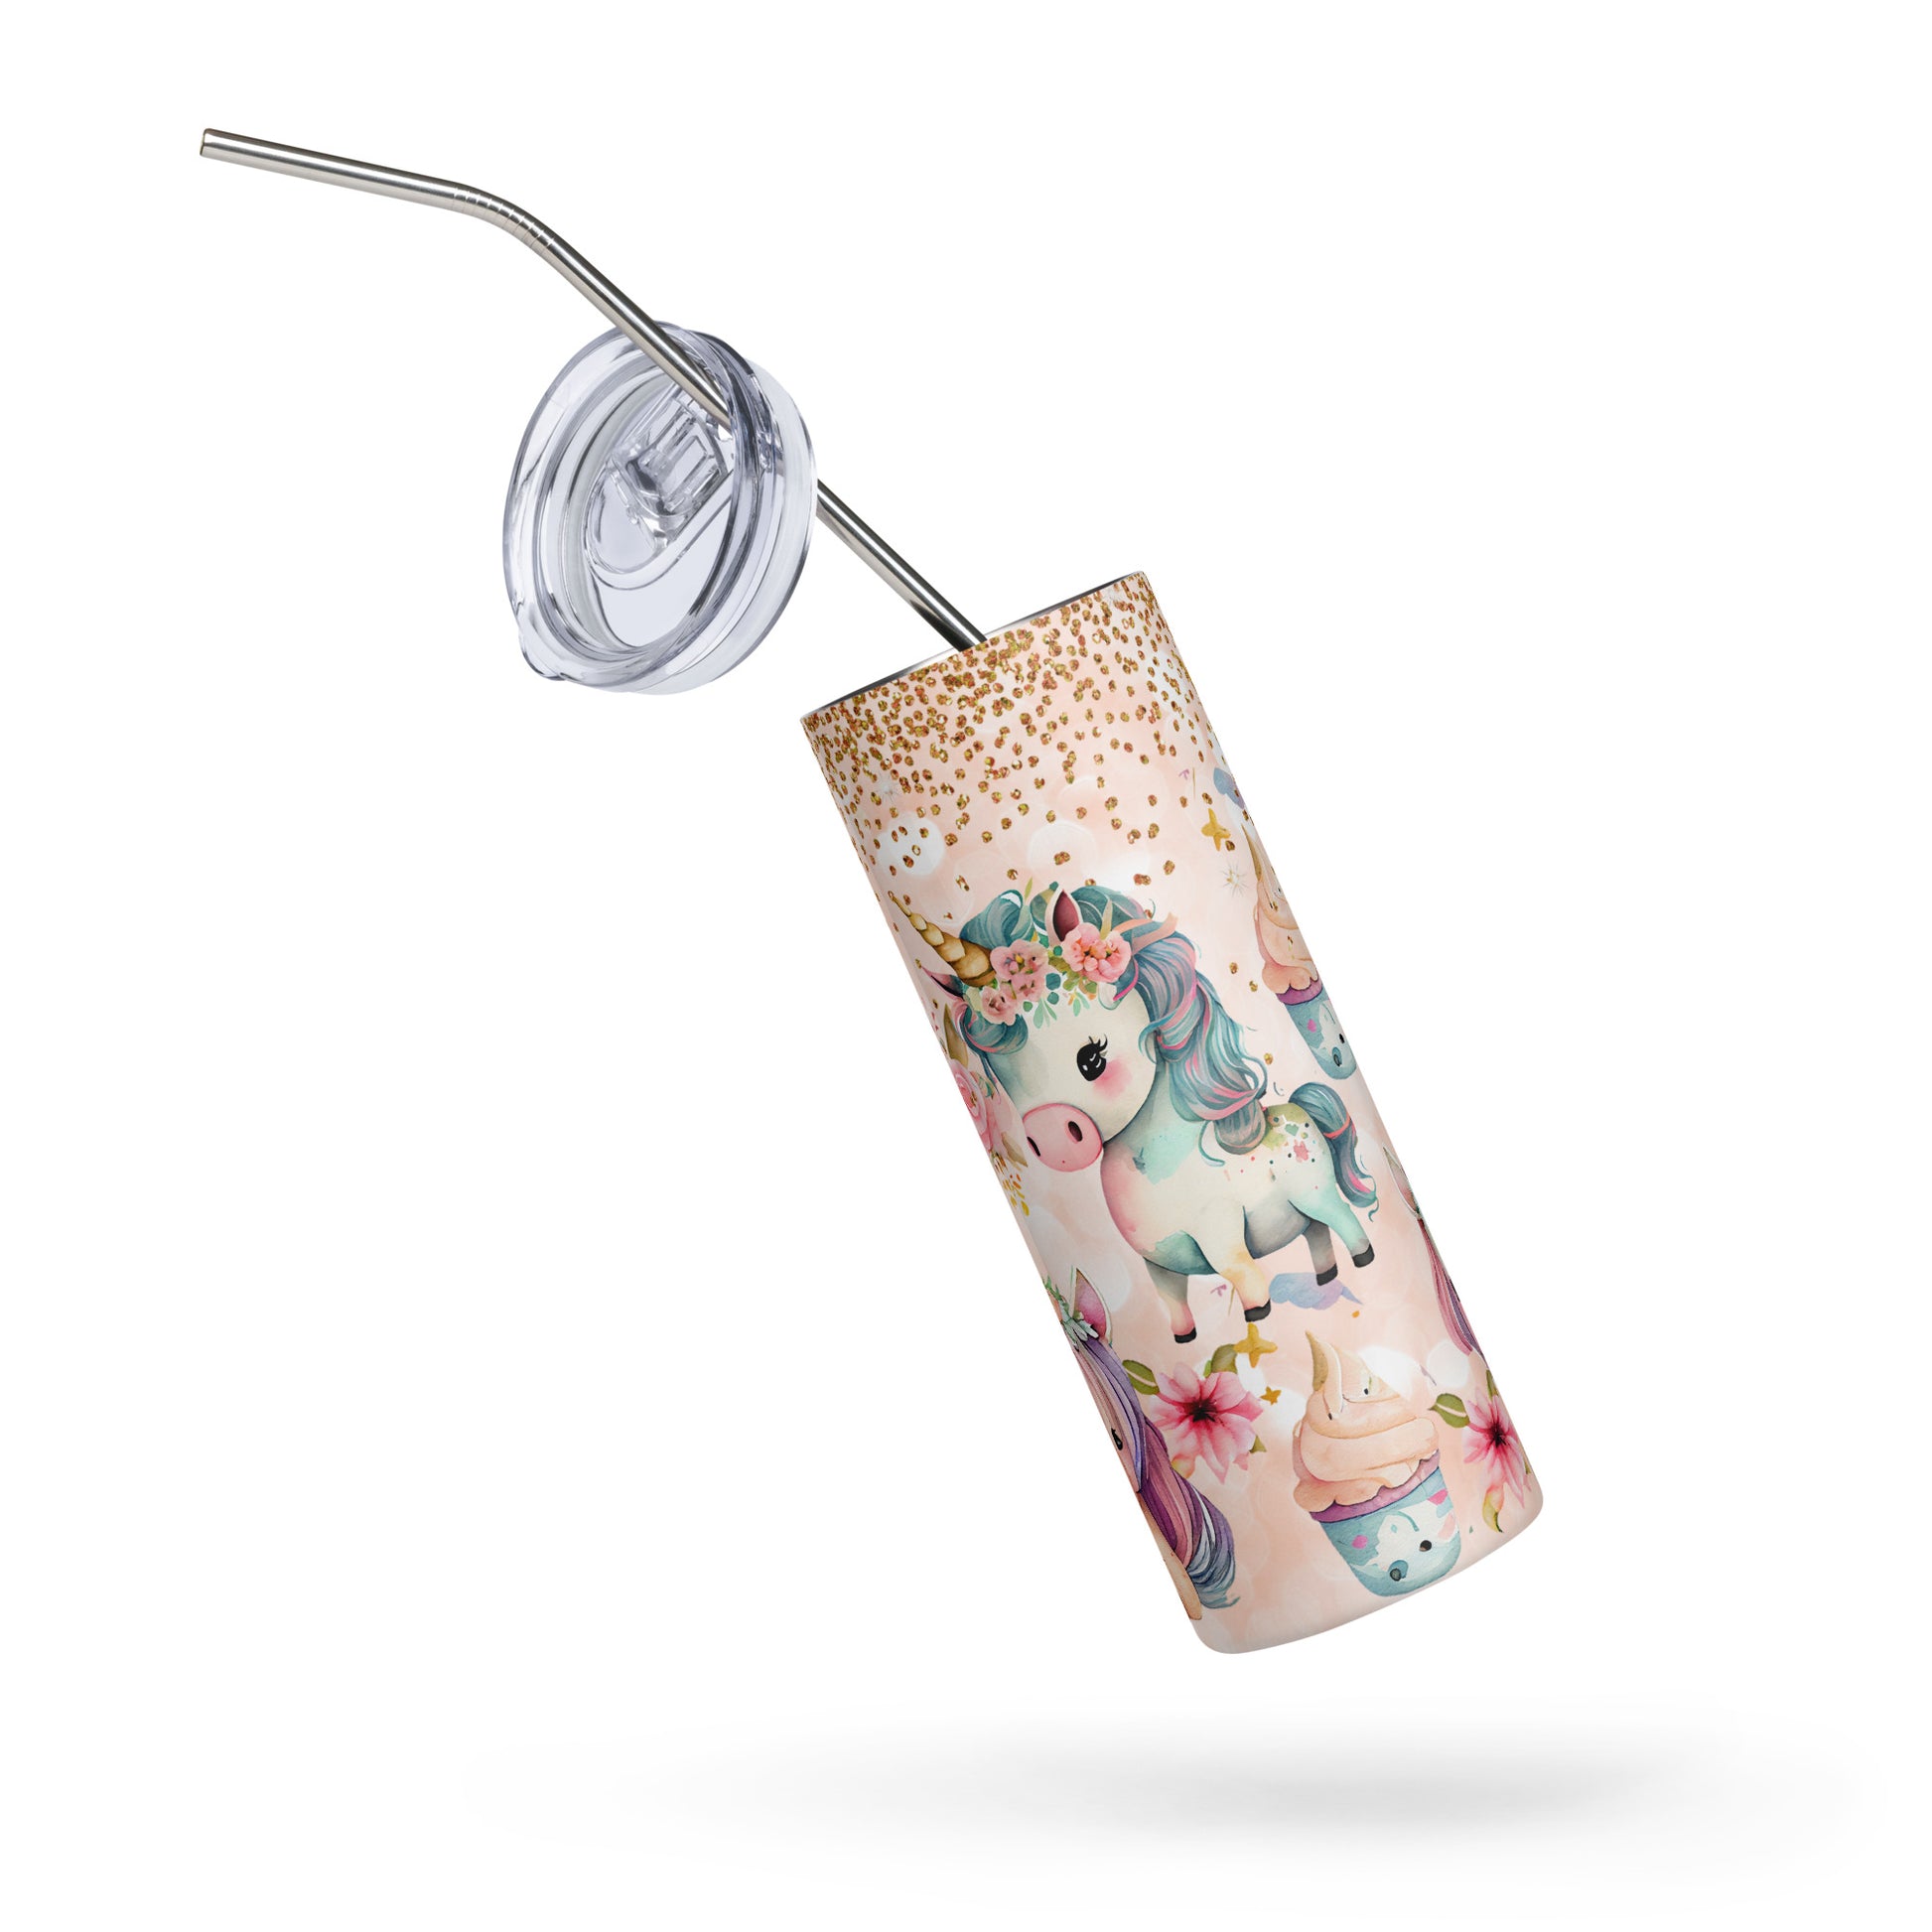 Unicorn Party Stainless steel tumbler CedarHill Country Market